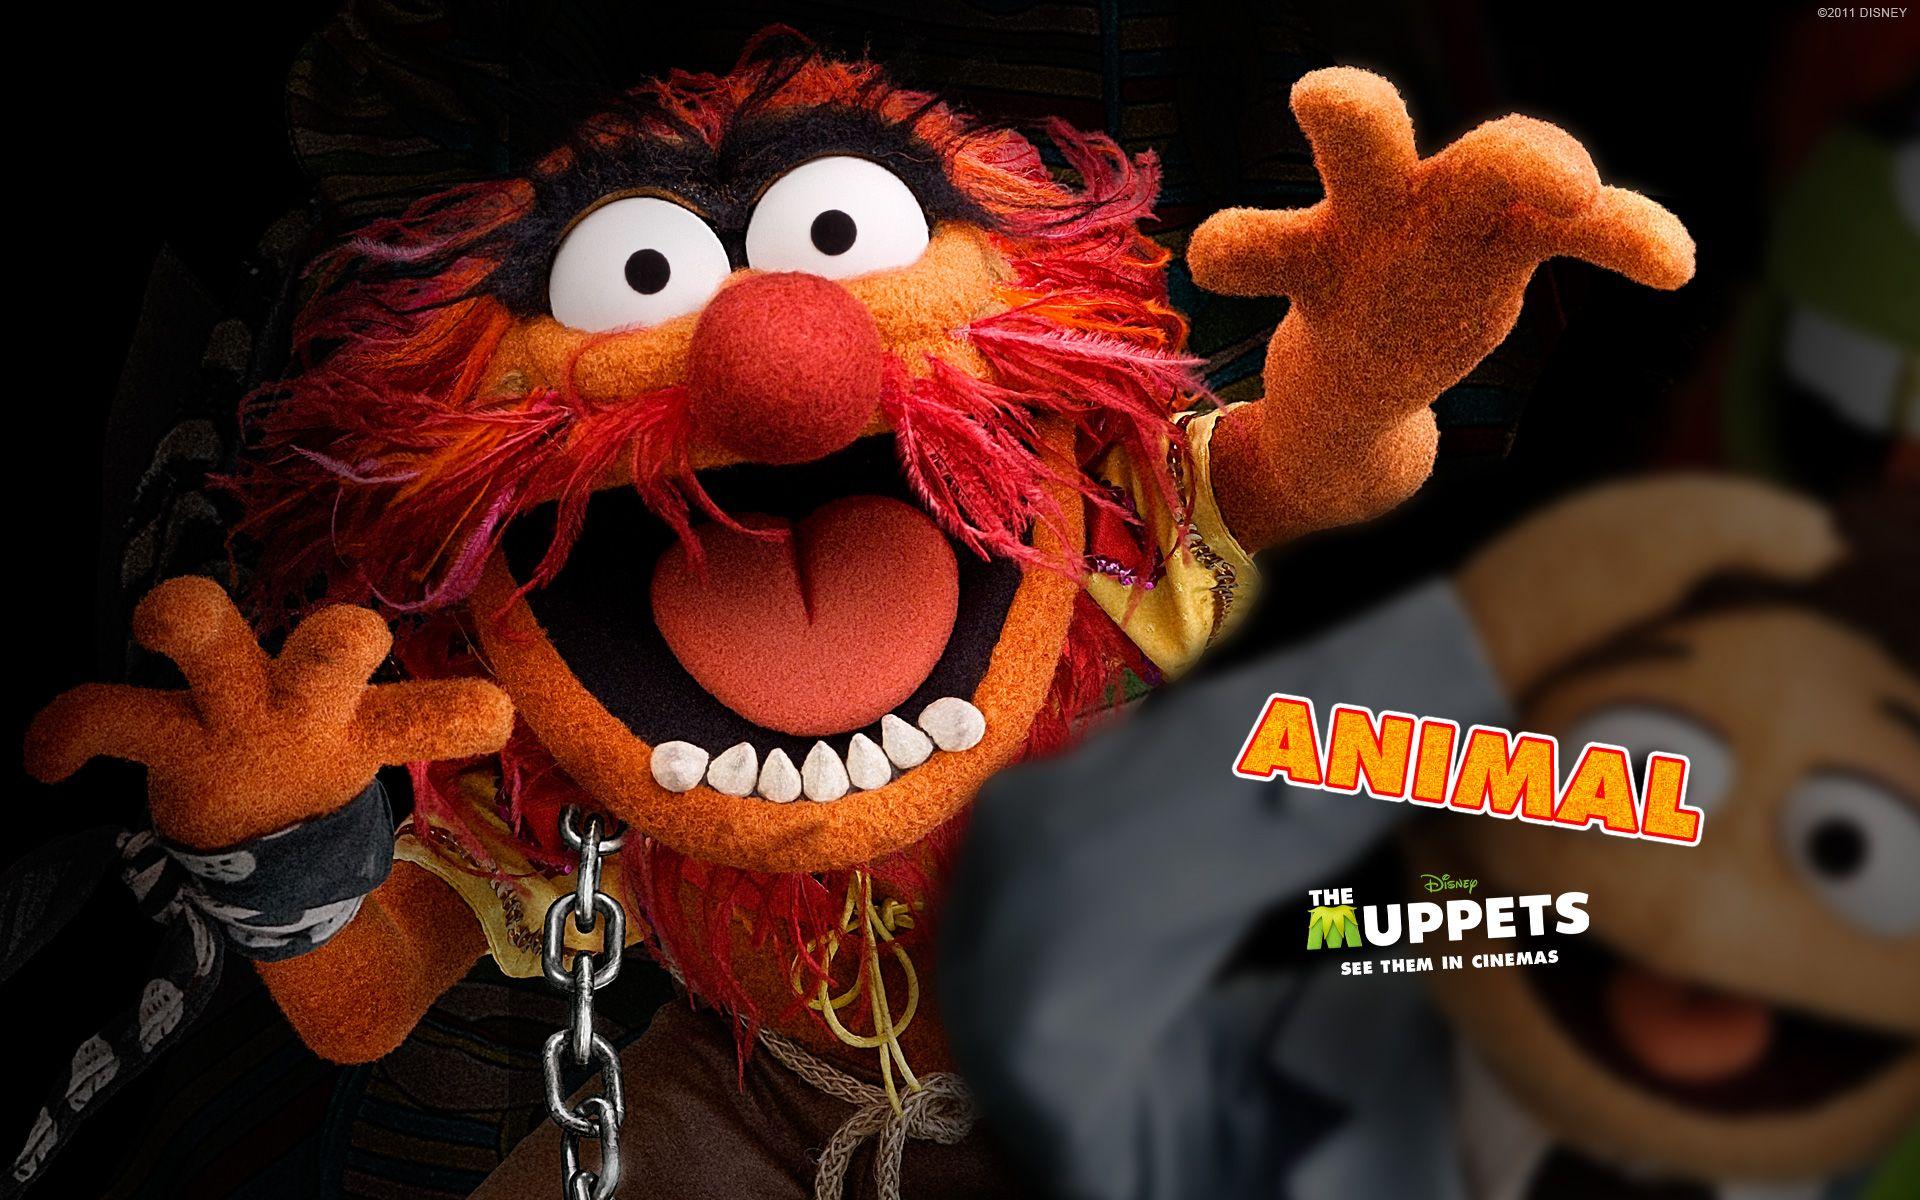 The Muppets: See it in Cinemas February 10